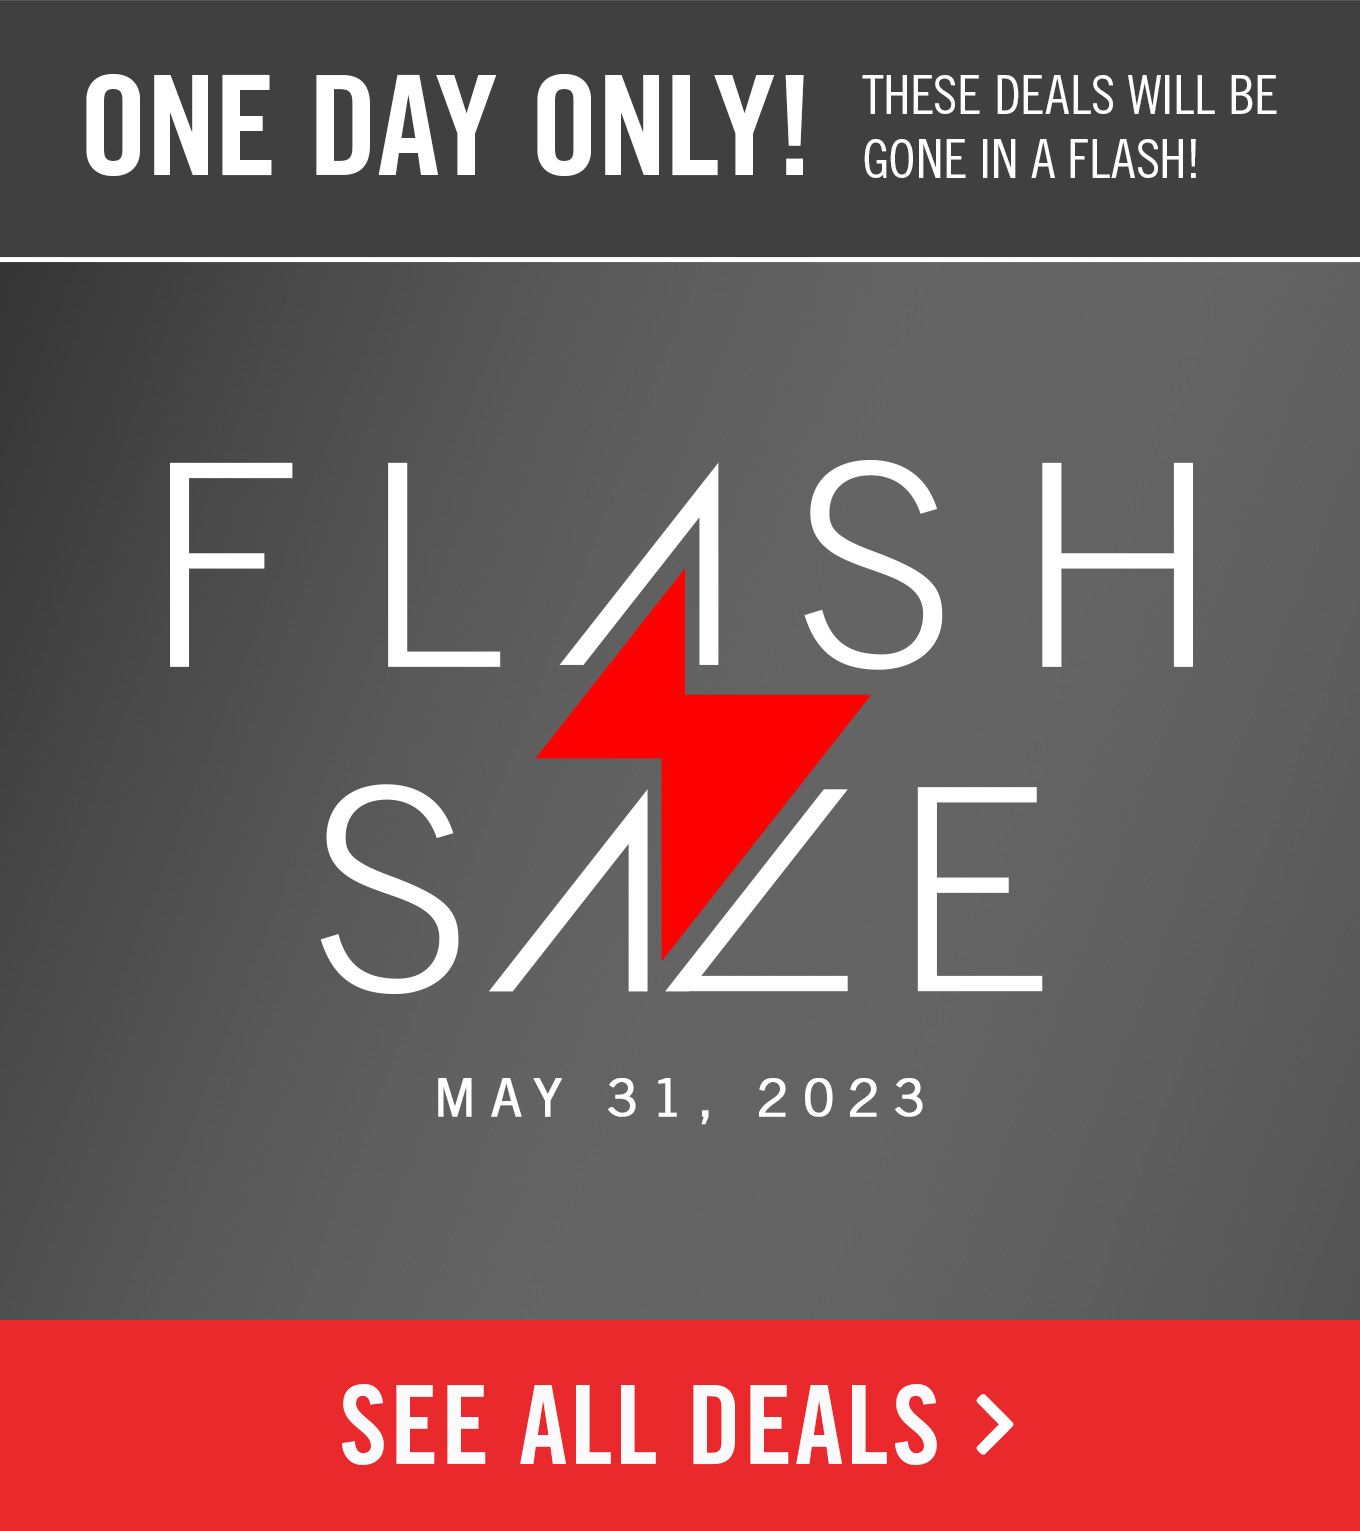 Flash Sale May 31! One day only! See all deals.